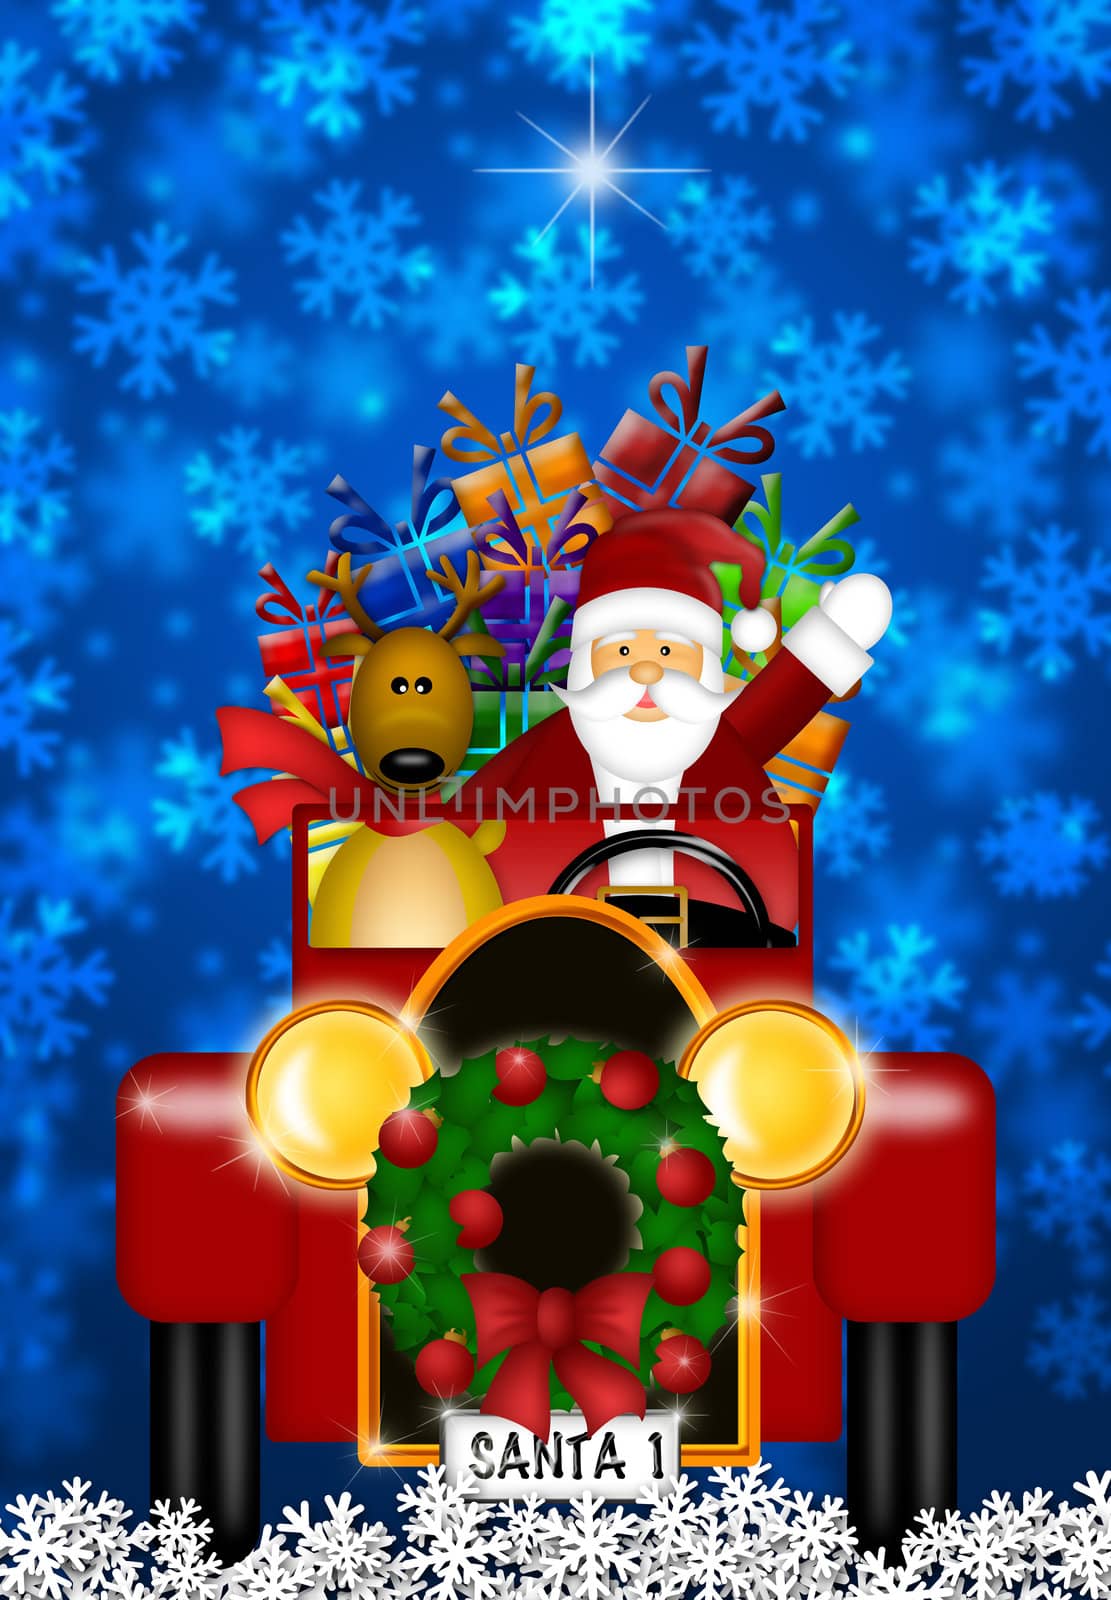 Santa Claus and Reindeer in Winter Snow Scene Driving in Vintage Red Car Illustration